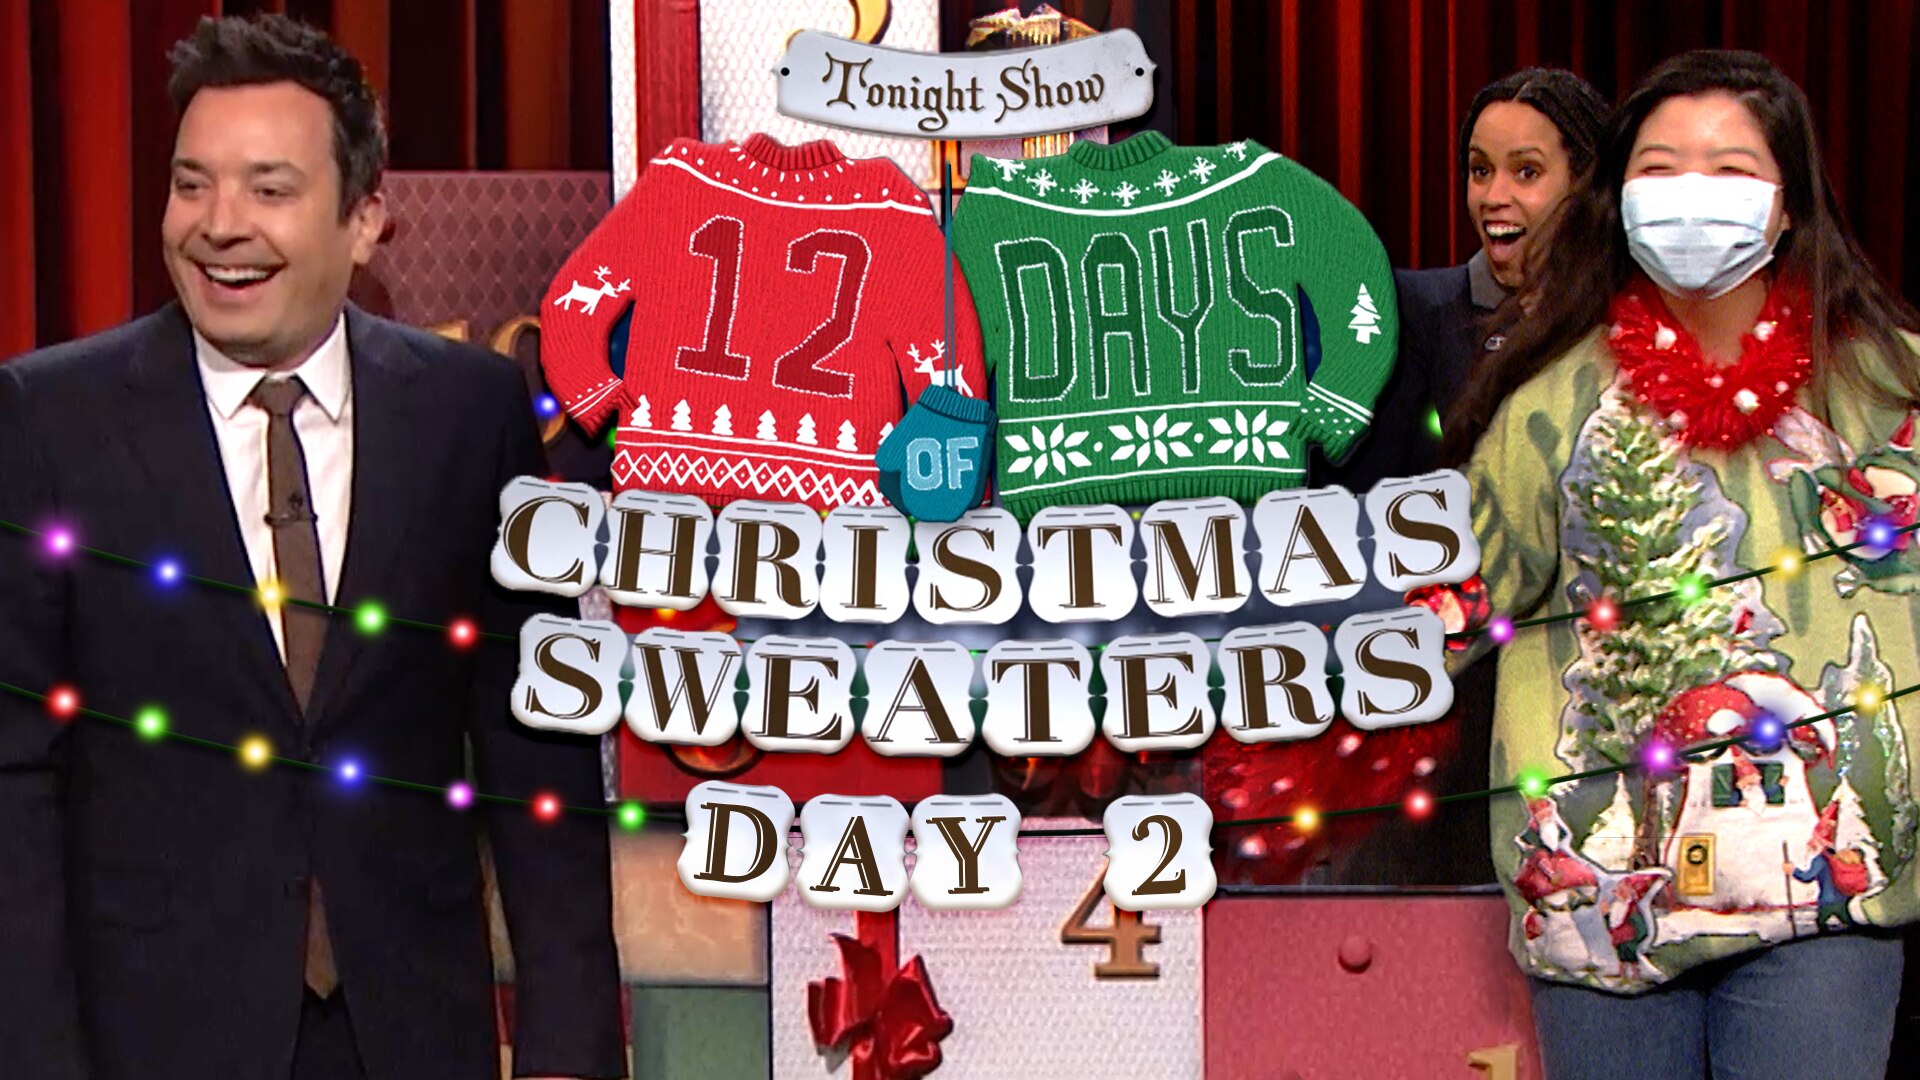 Watch The Tonight Show Starring Jimmy Fallon Highlight 12 Days of